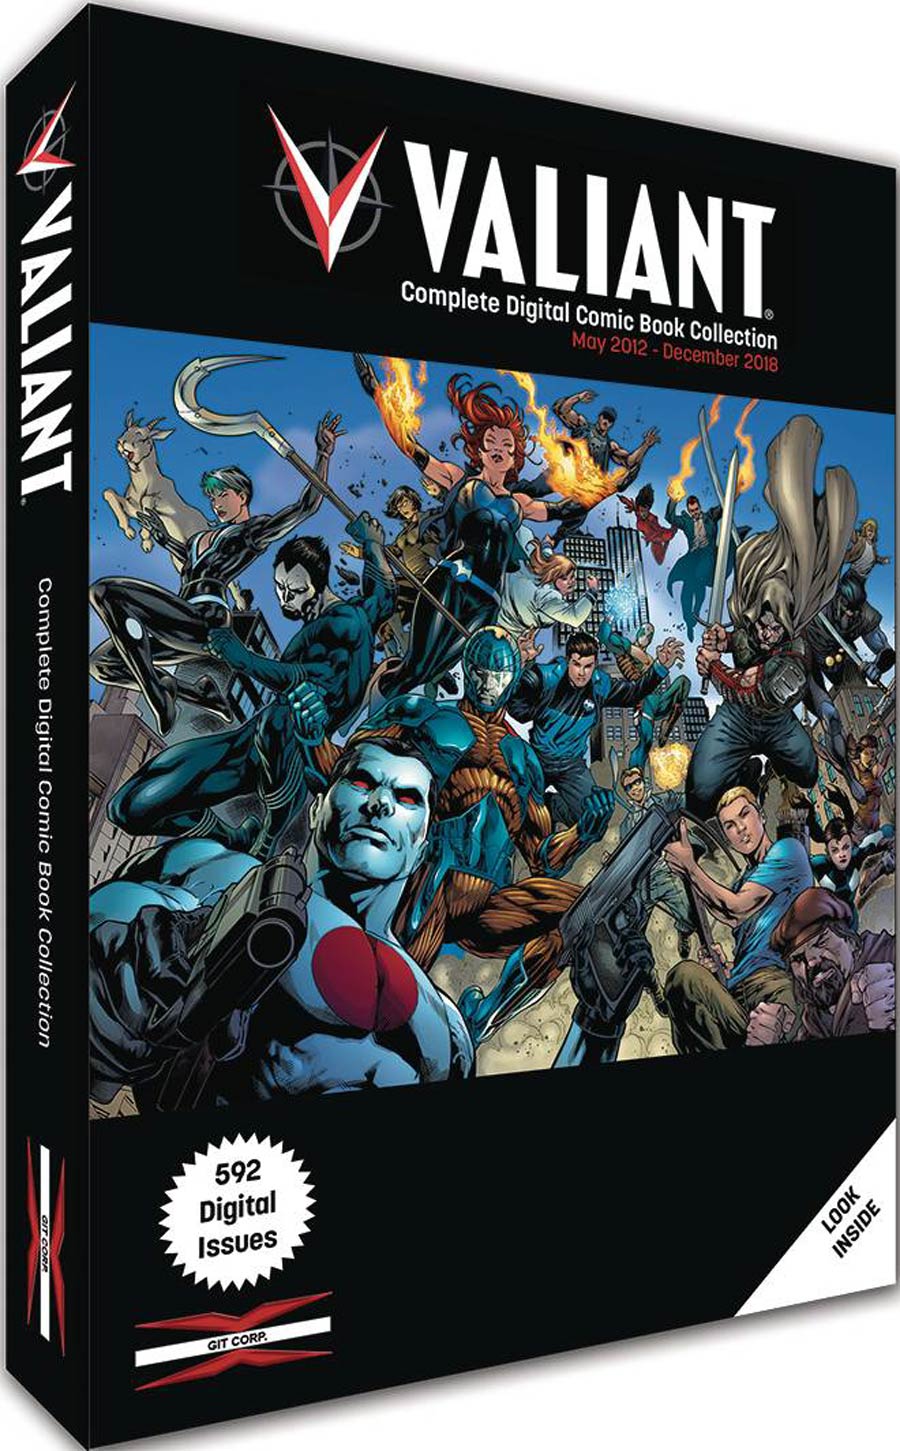 Valiant Complete Digital Comic Book Collection 2012-2018